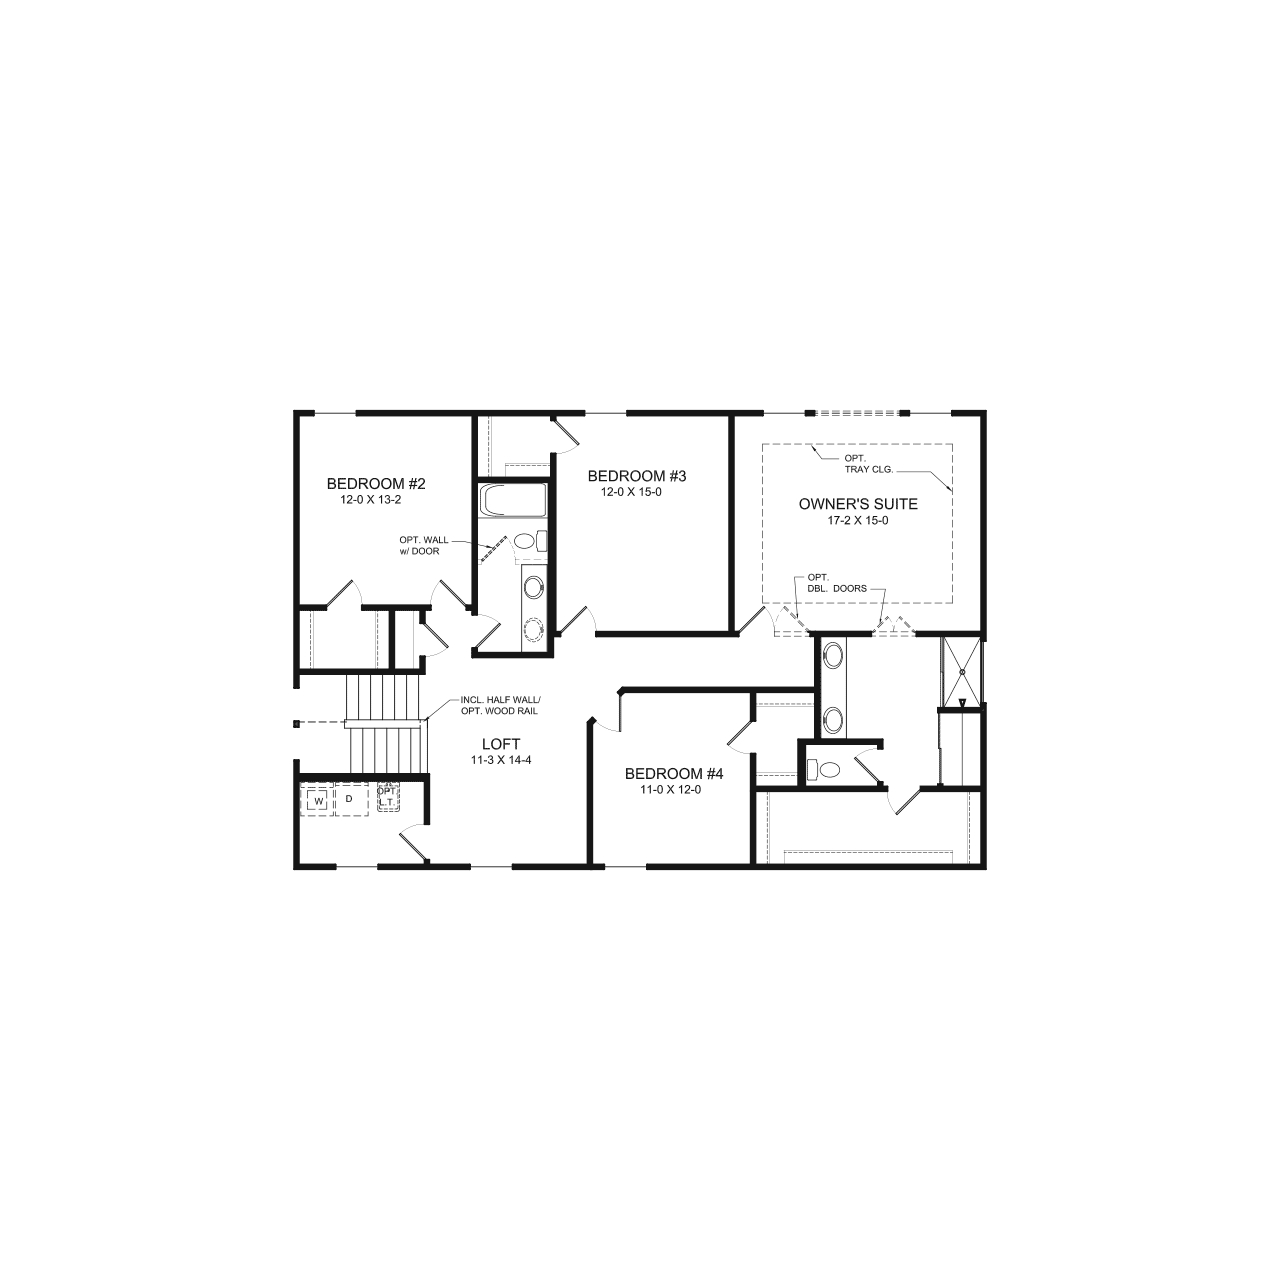 8 Images Fischer Homes Floor Plans And Review Alqu Blog